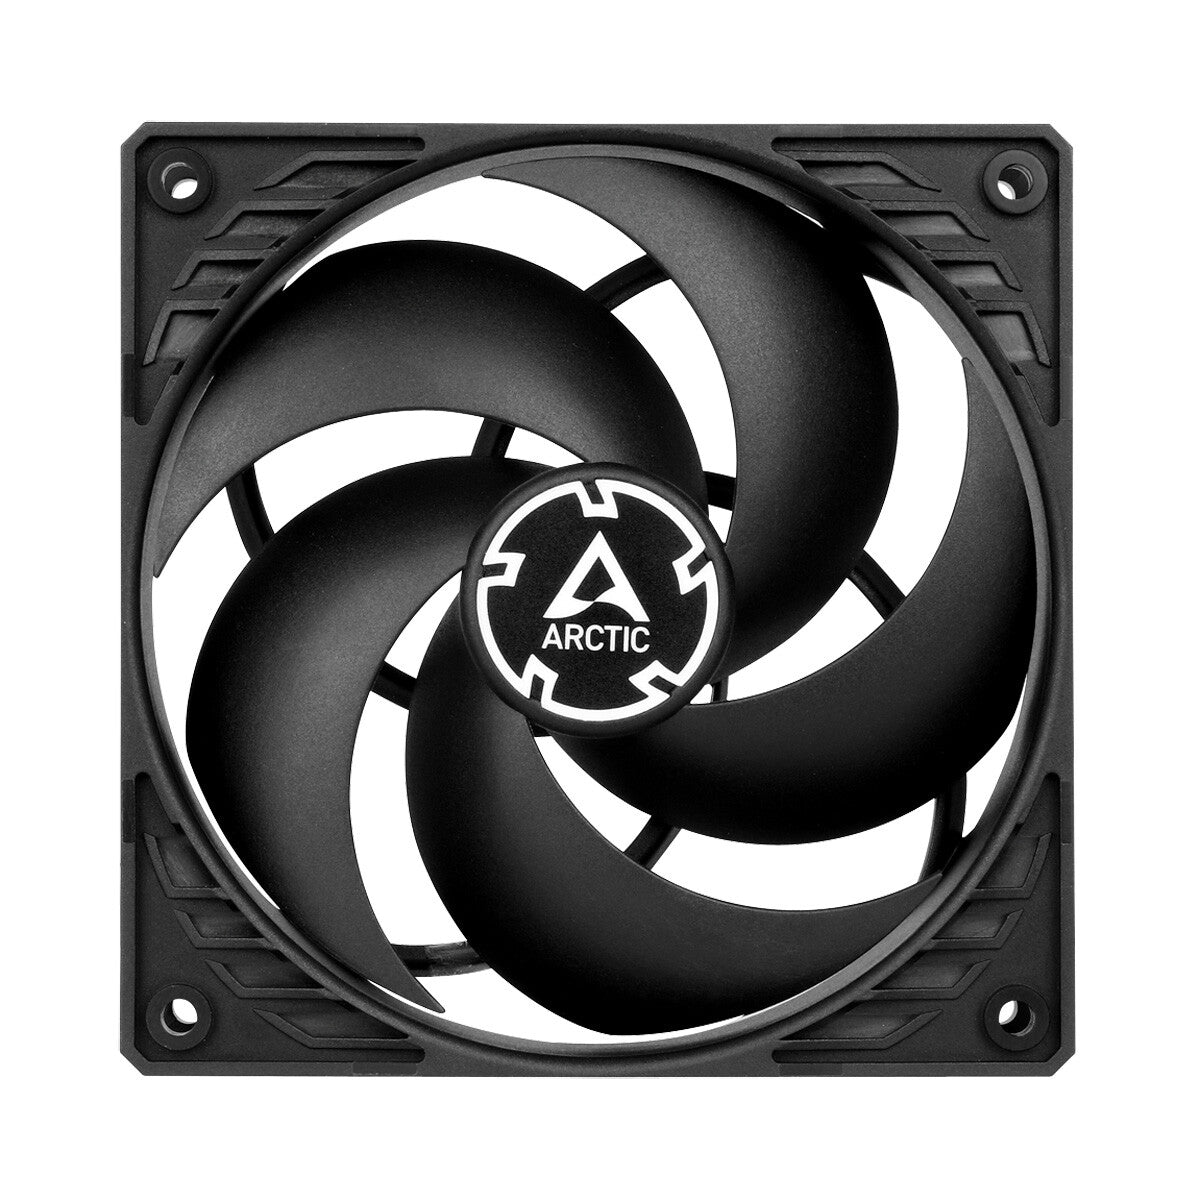 ARCTIC P12 PWM PST - Computer Case Fan in Black - 120mm (Pack of 5)